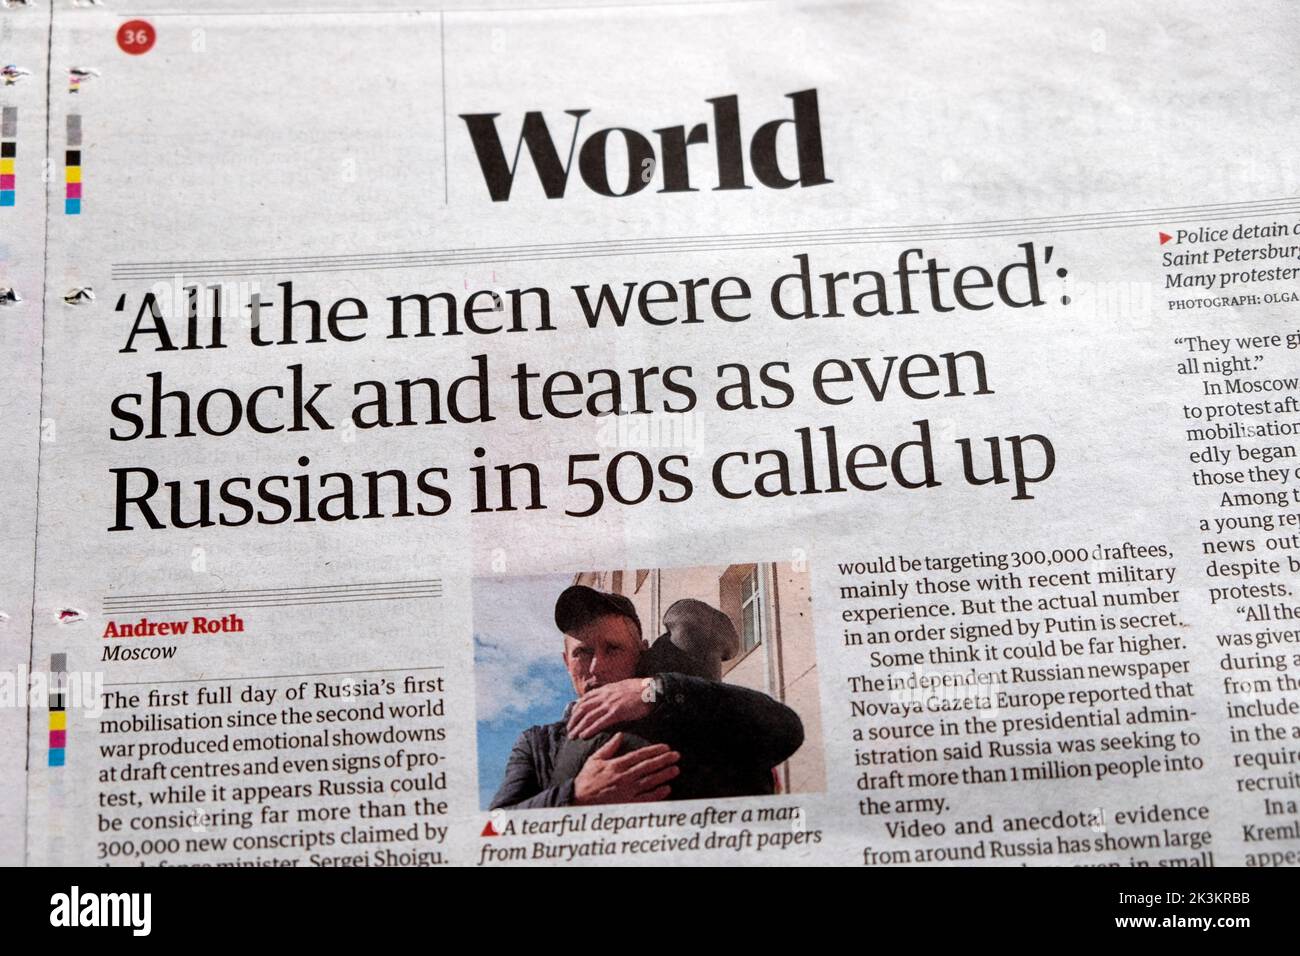 'All the men were drafted': shock and tears as even Russians in 50s called up' Guardian newspaper headline Ukraine war clipping 23 September 2022 UK Stock Photo